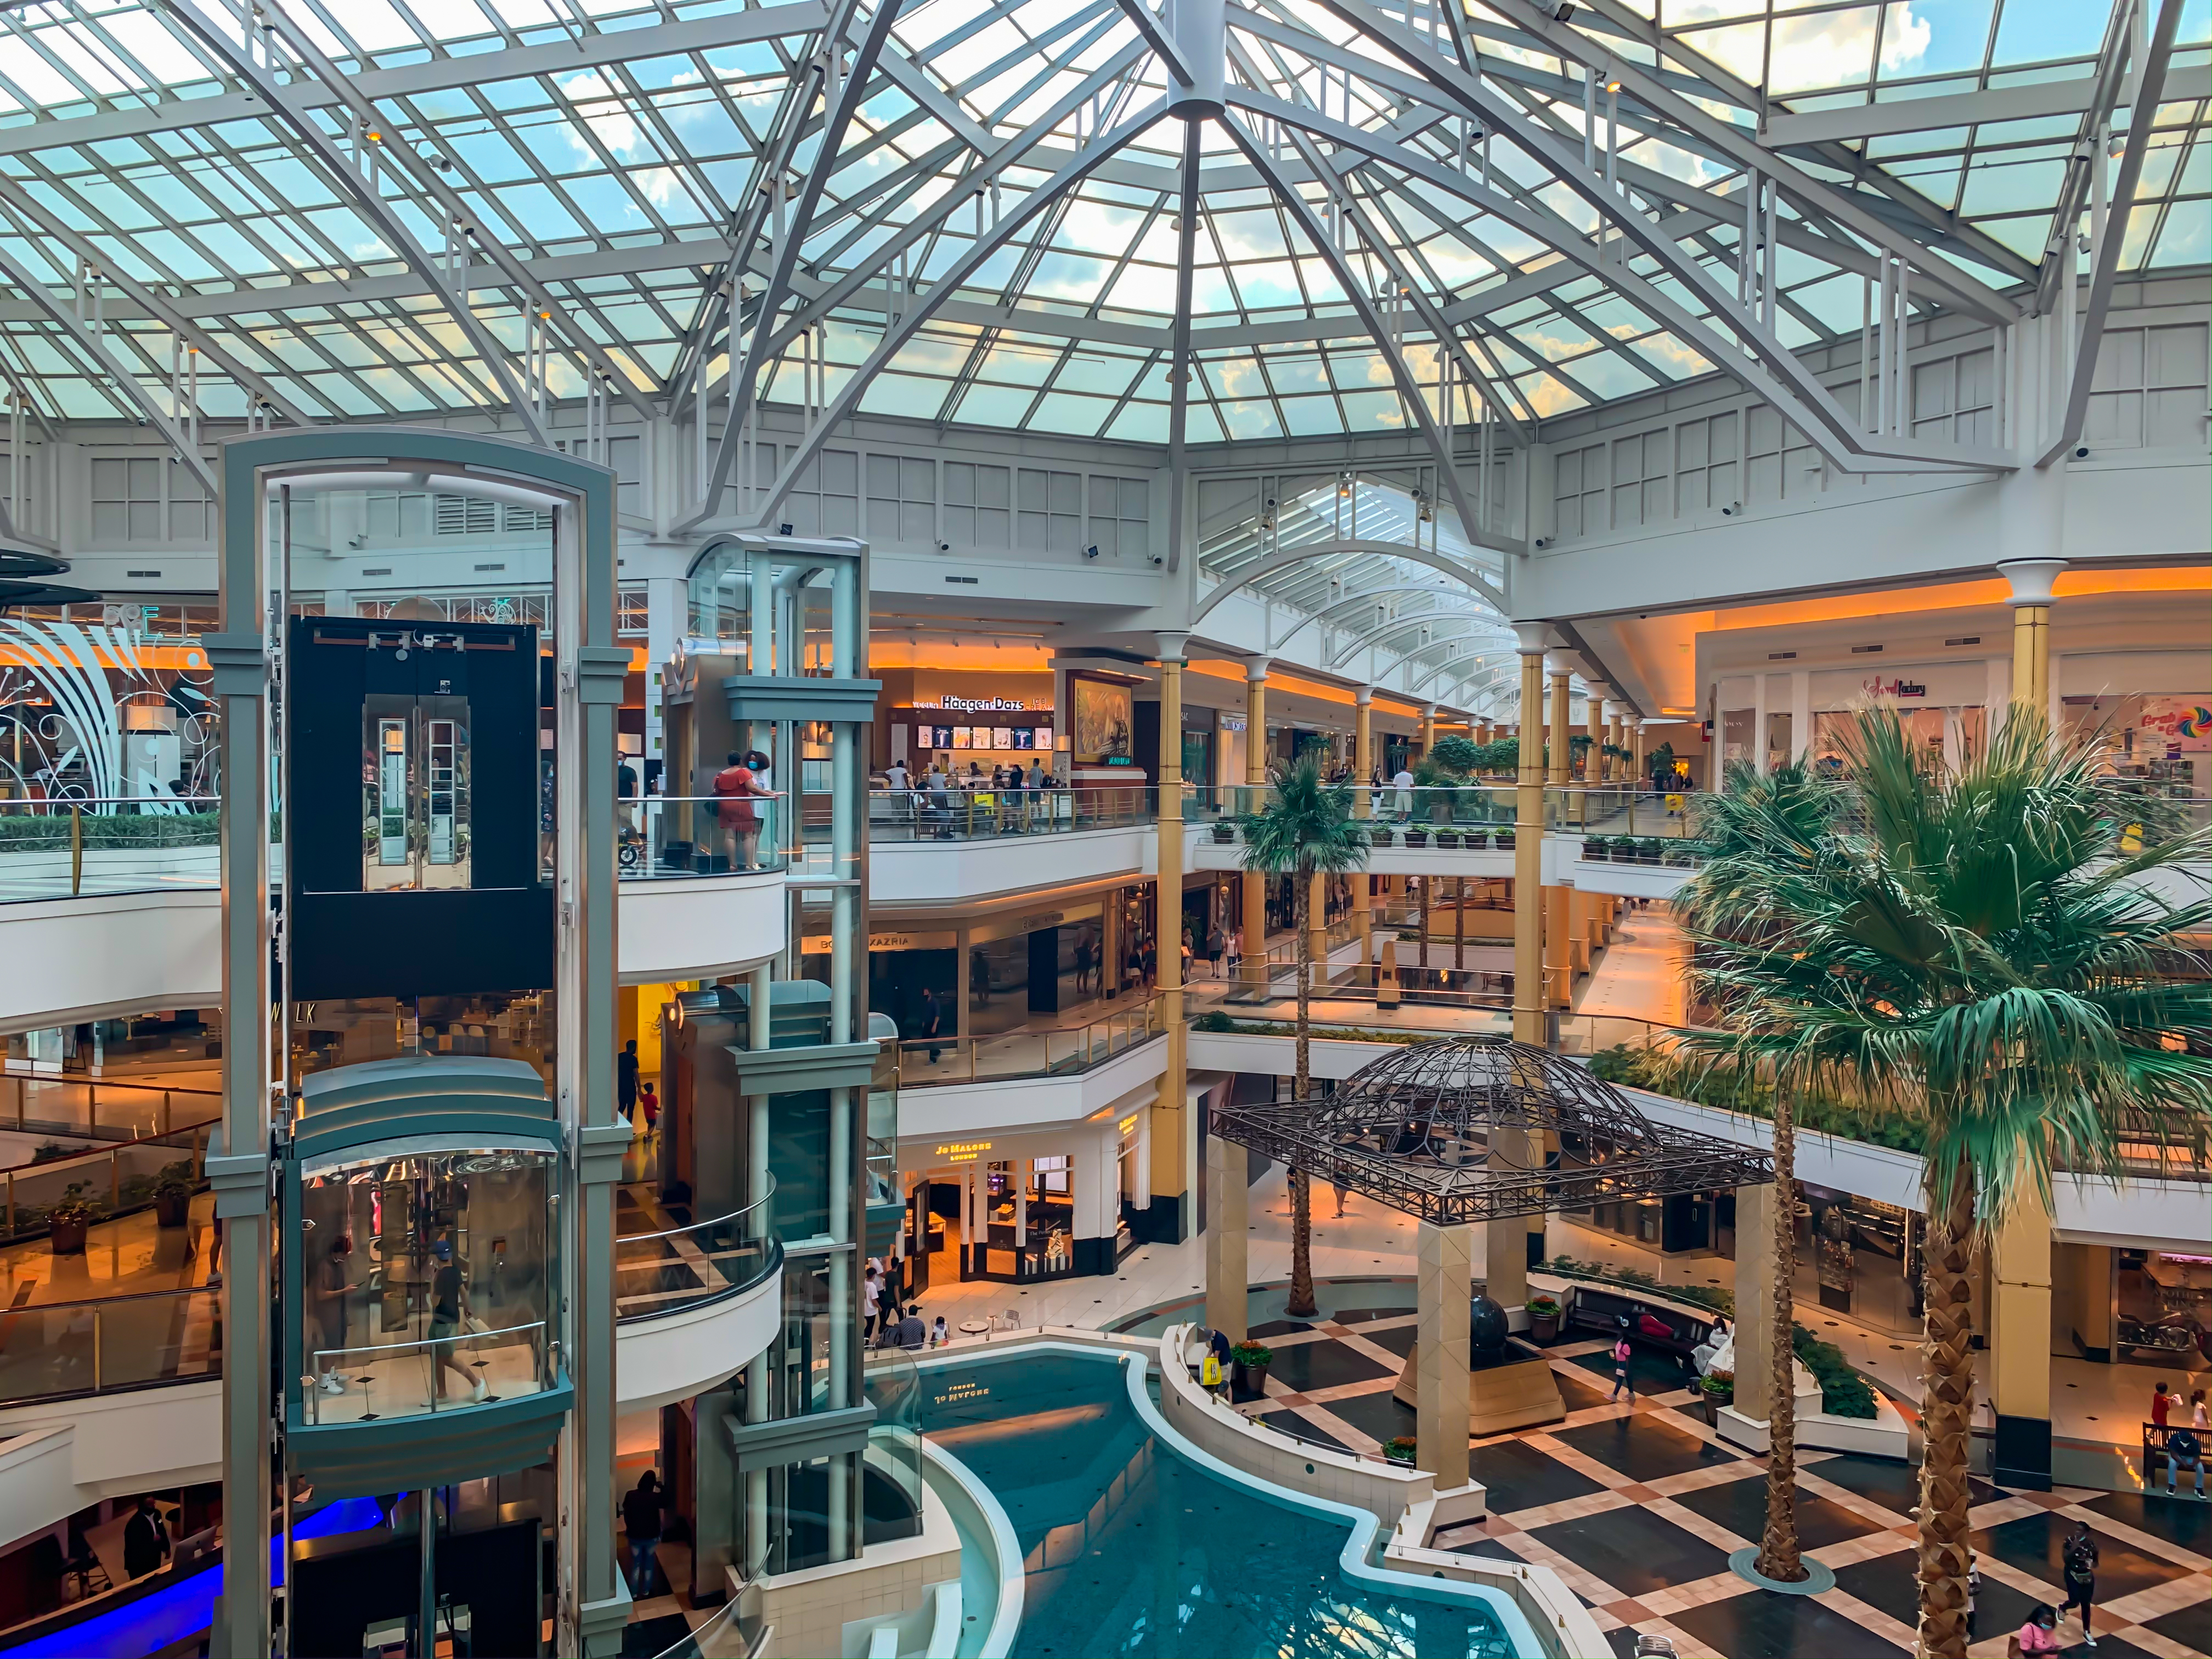 The interior of Somerset Collection, a mall situated in Troy, Michigan.